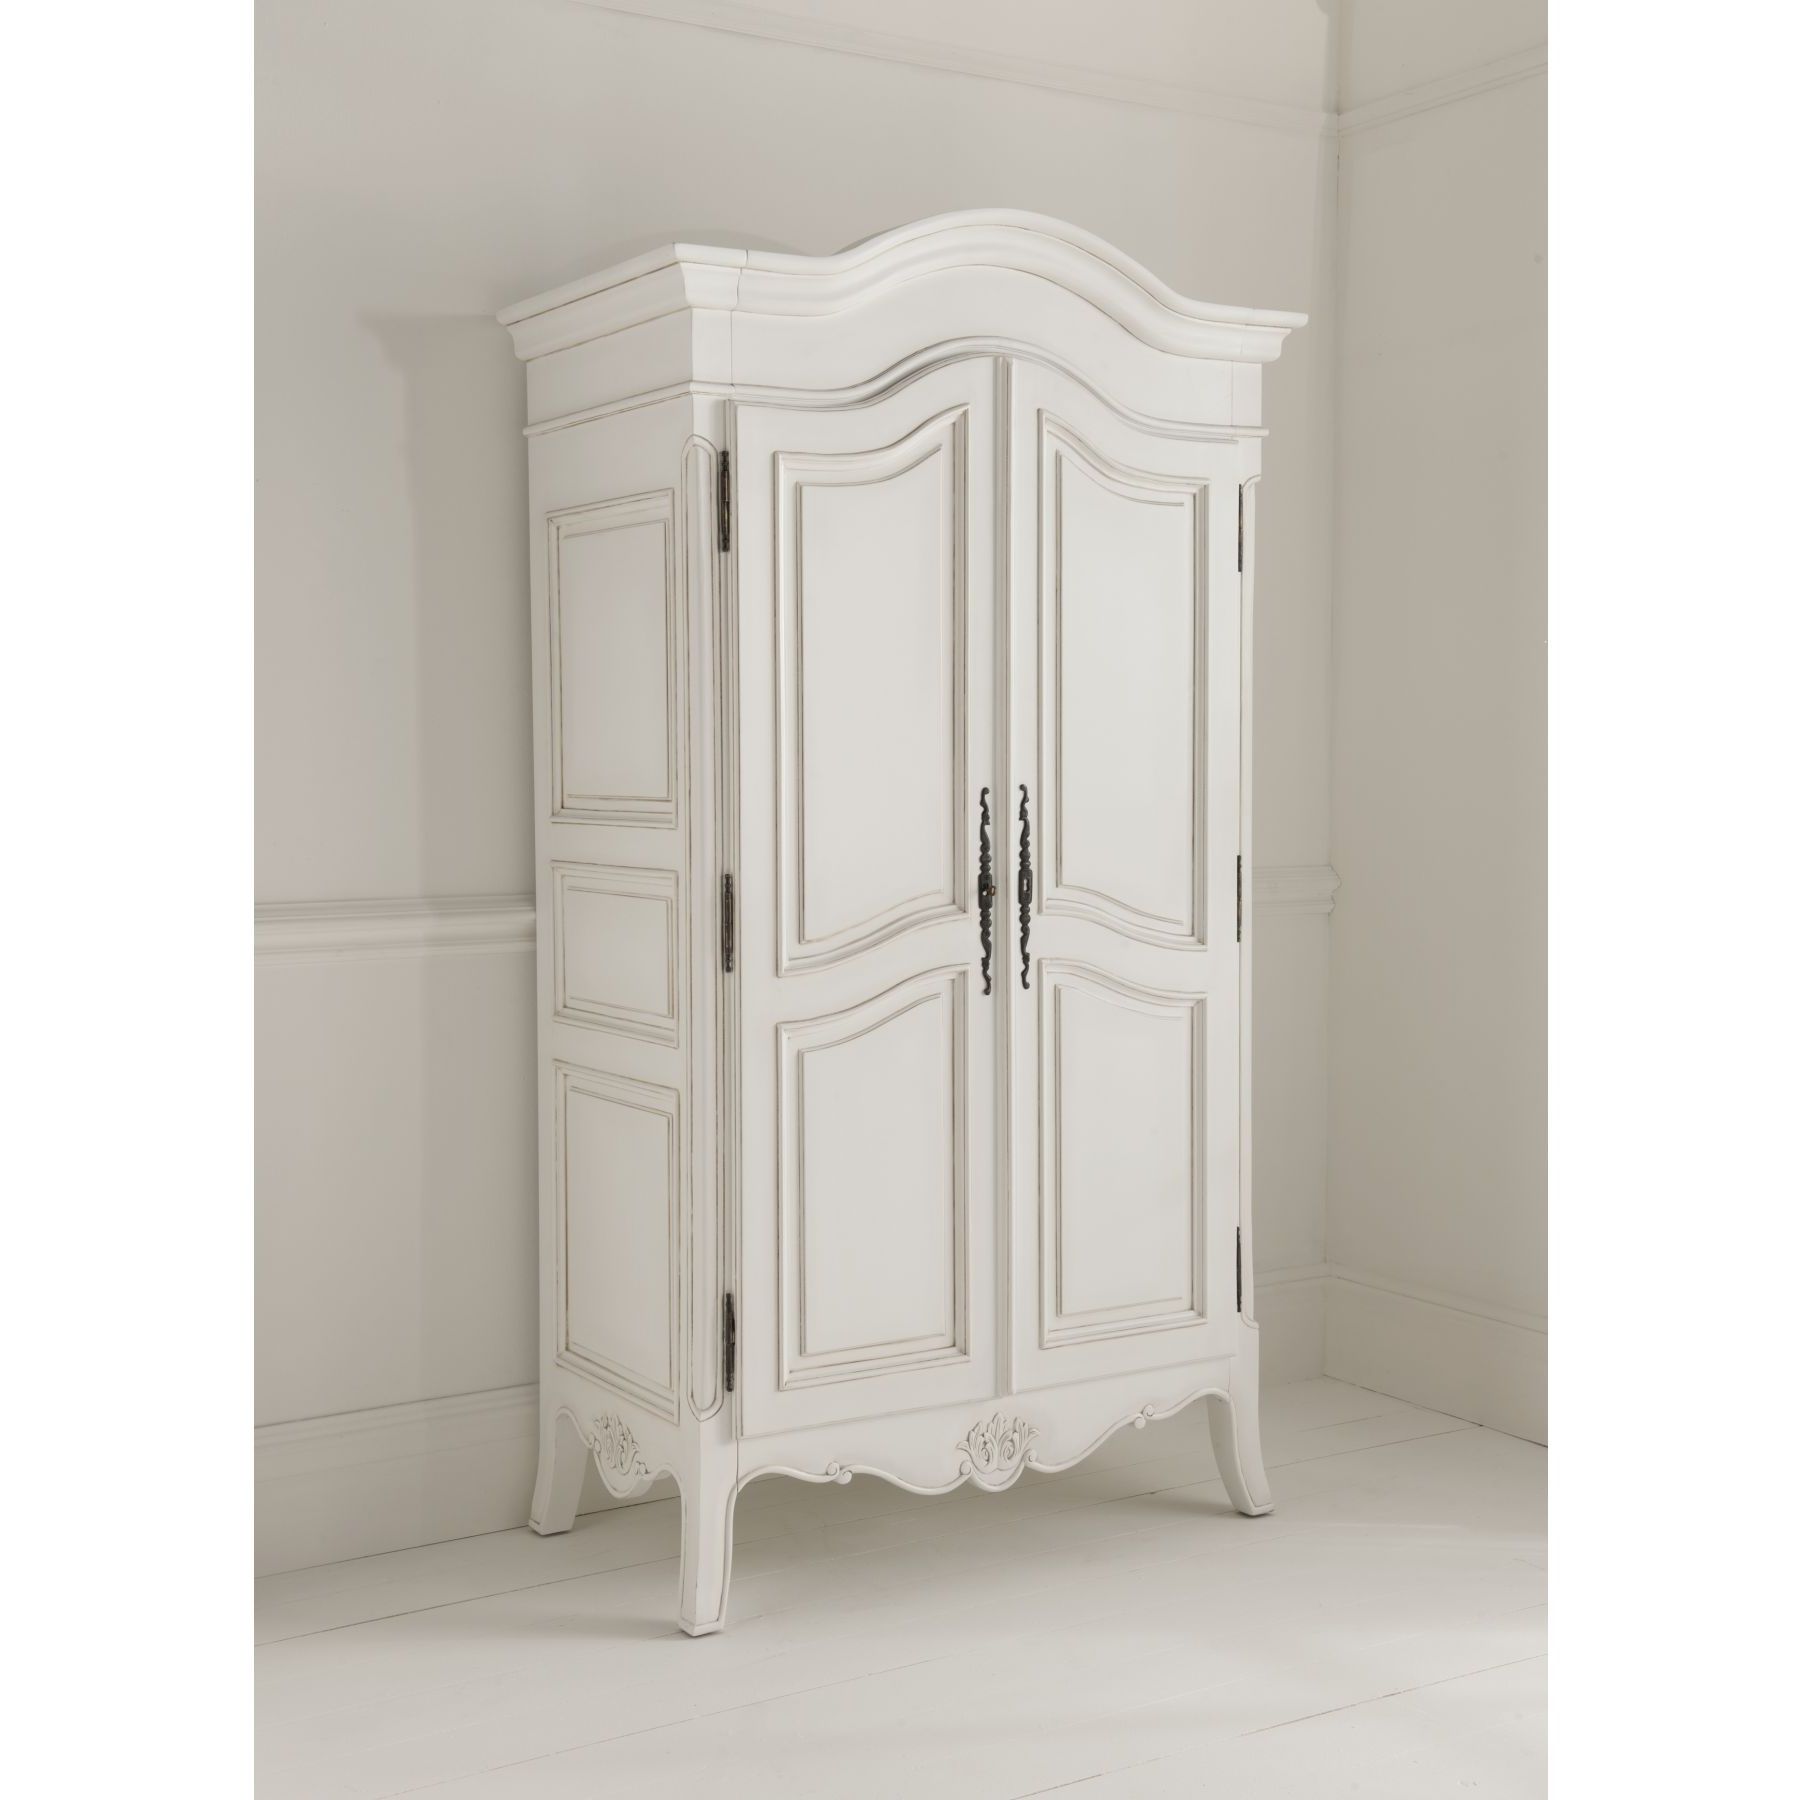 Furniture: Exciting Armoire Wardrobe For Interior Storage Design Throughout Current French Built In Wardrobes (View 4 of 15)